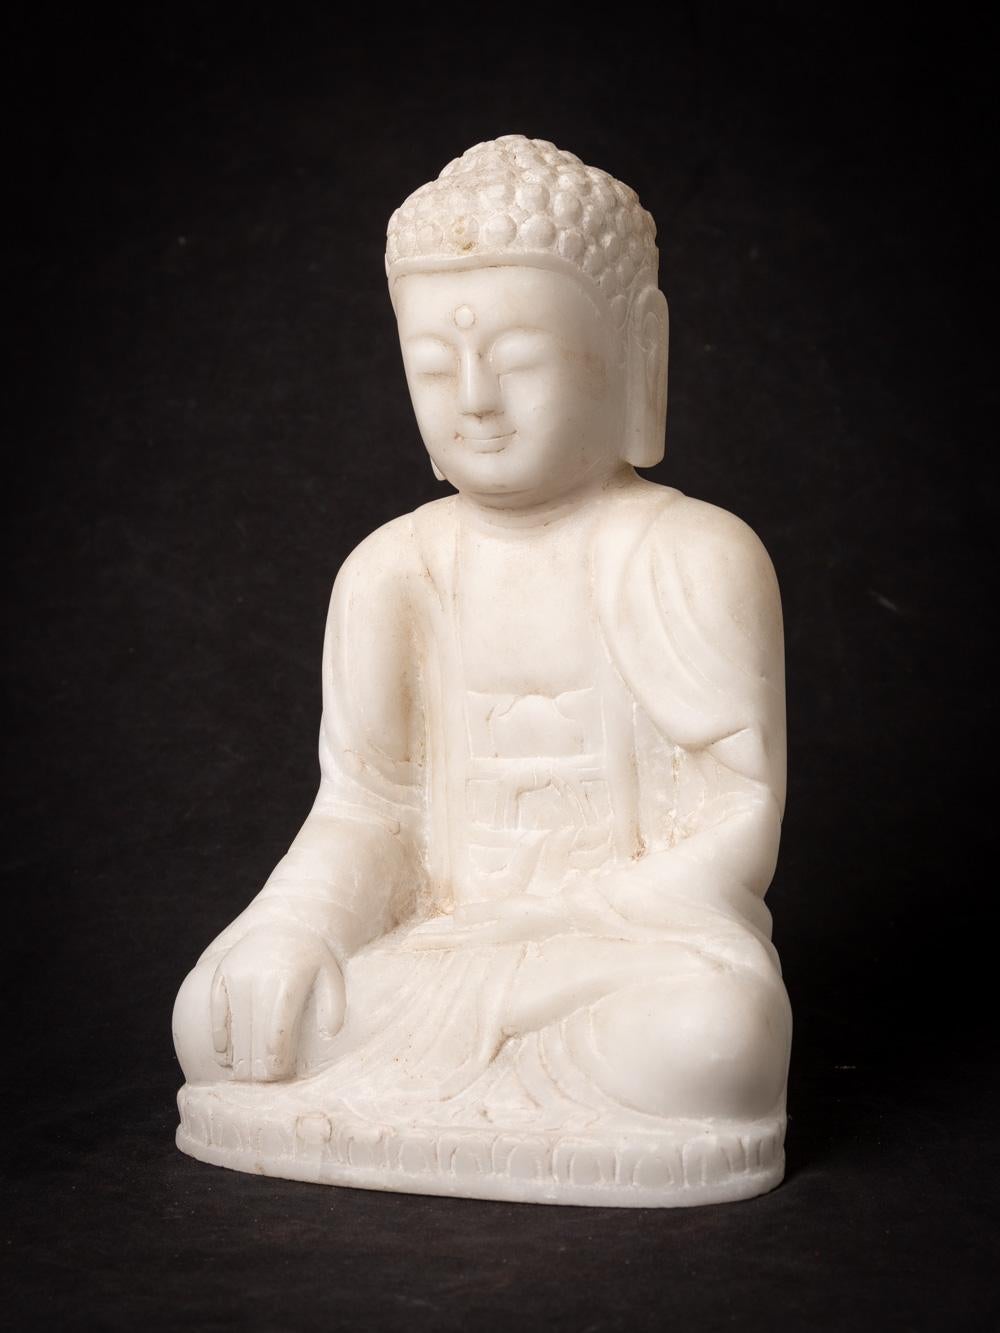 This elegant Marble Buddha statue, portraying the Bhumisparsha mudra, is a work of art that stands at 30.2 cm in height, with dimensions of 19.3 cm in width and 14.8 cm in depth. Carved by hand from a single block of white marble, it represents a